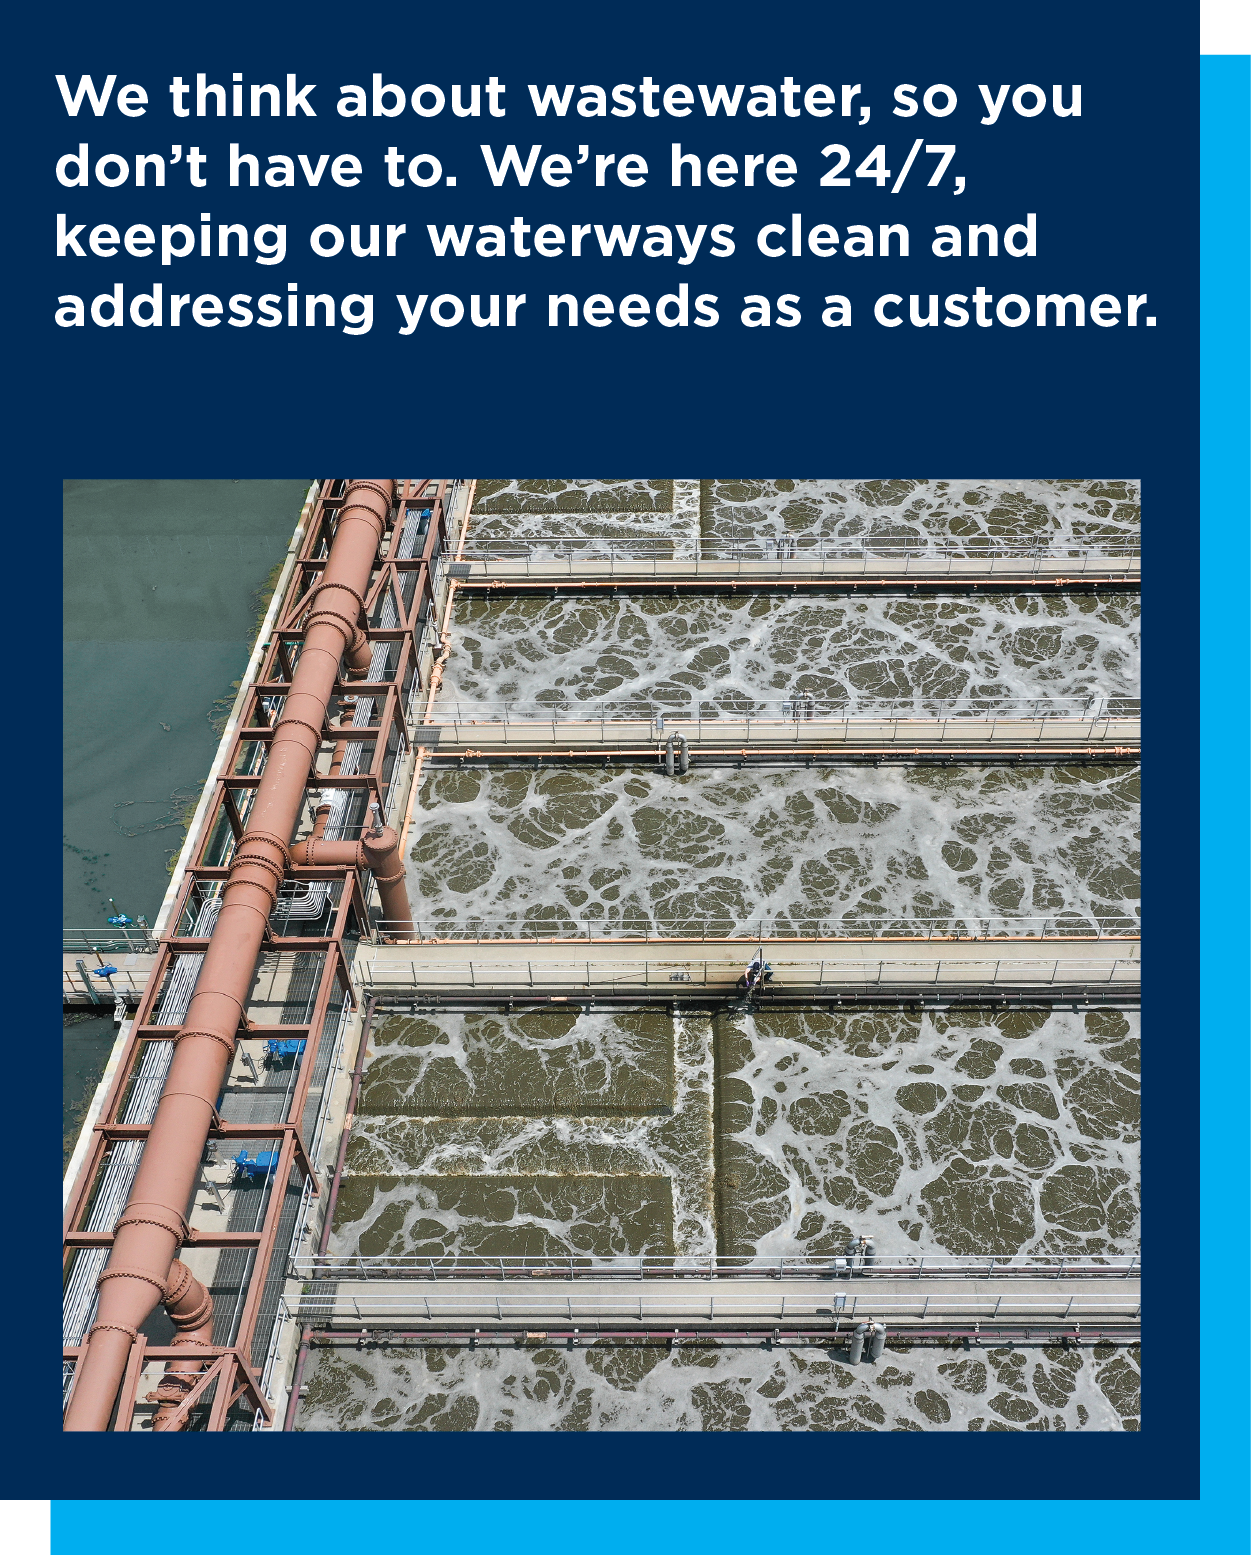 Quote: We think about wastewater so you don't have to. We're here 24/7, keeping our waterways clean and addressing your needs as a customer